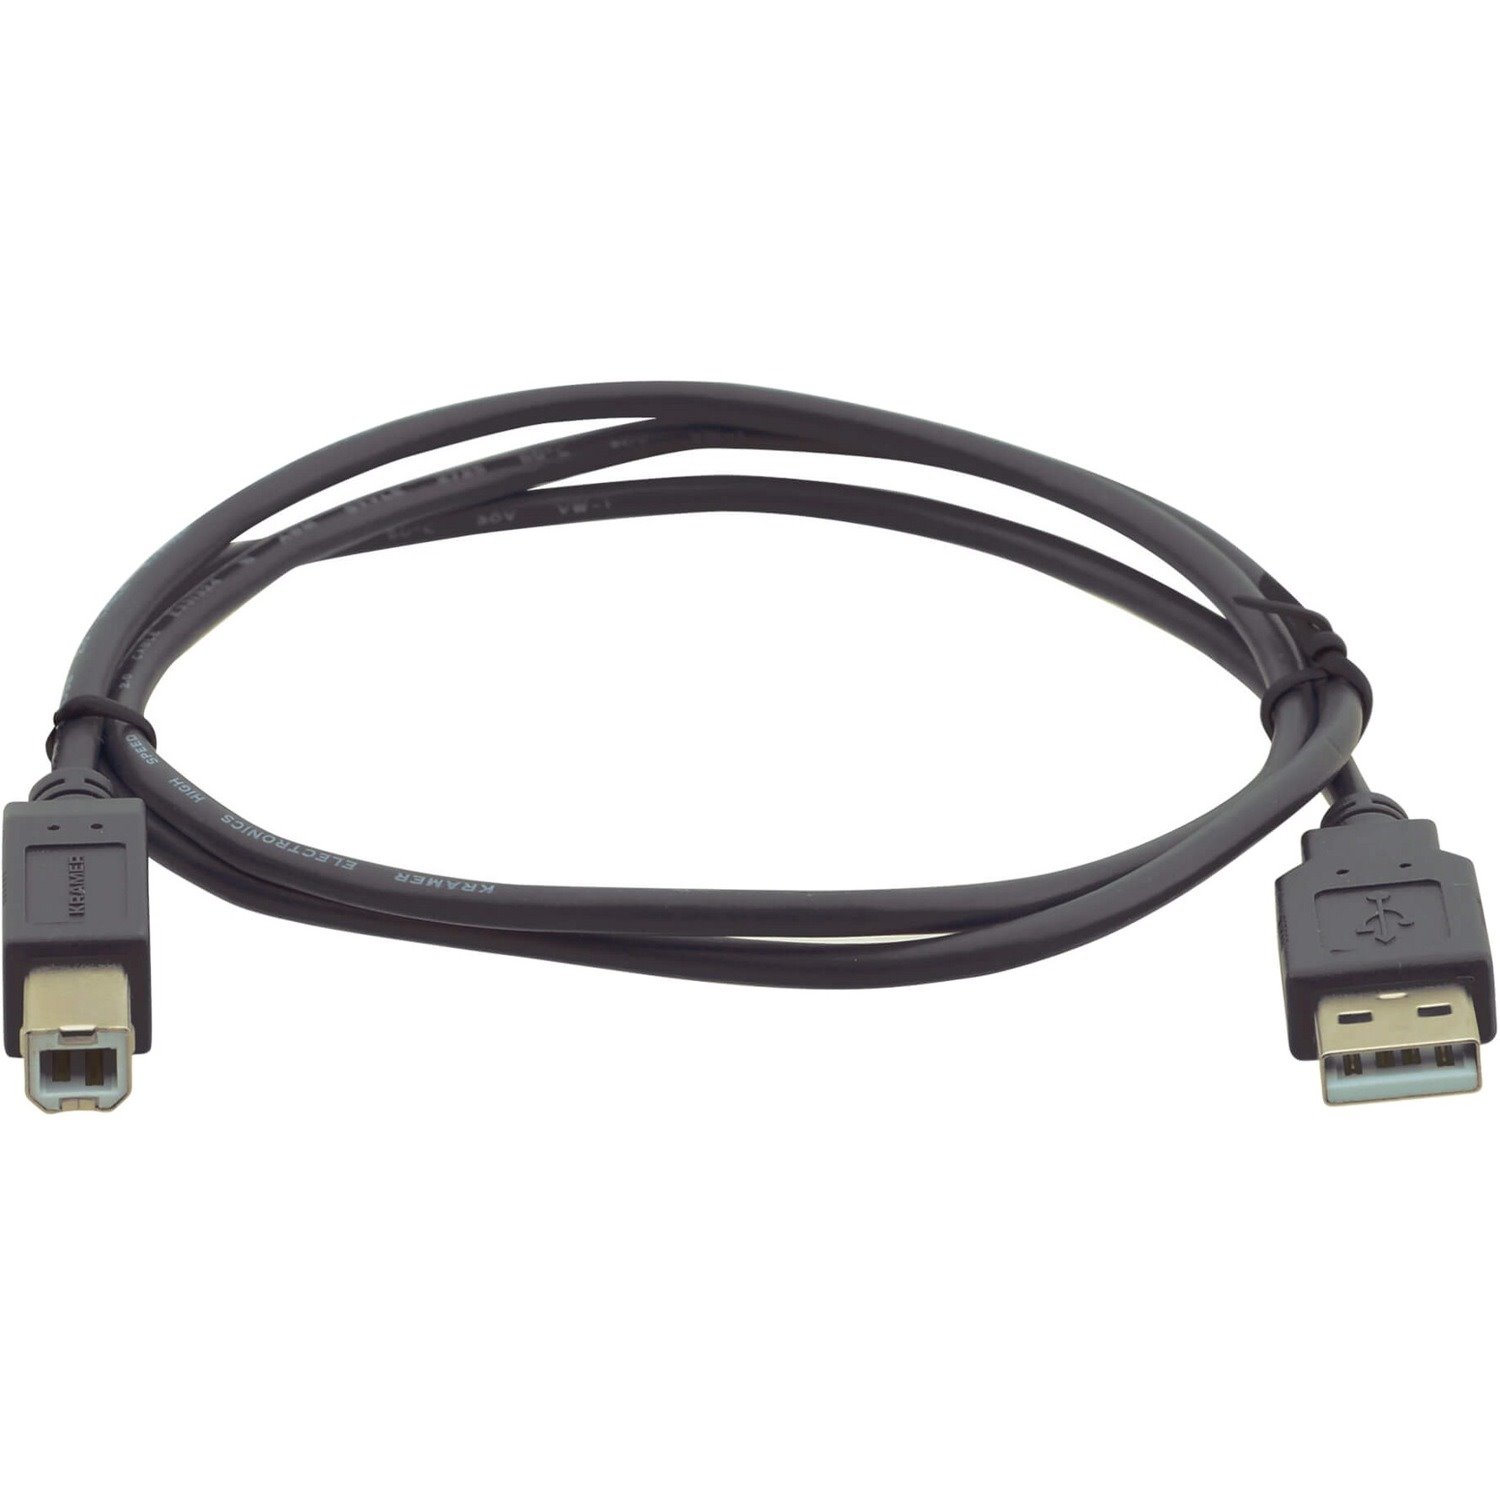 Kramer USB 2.0 A (M) to B (M) Cable